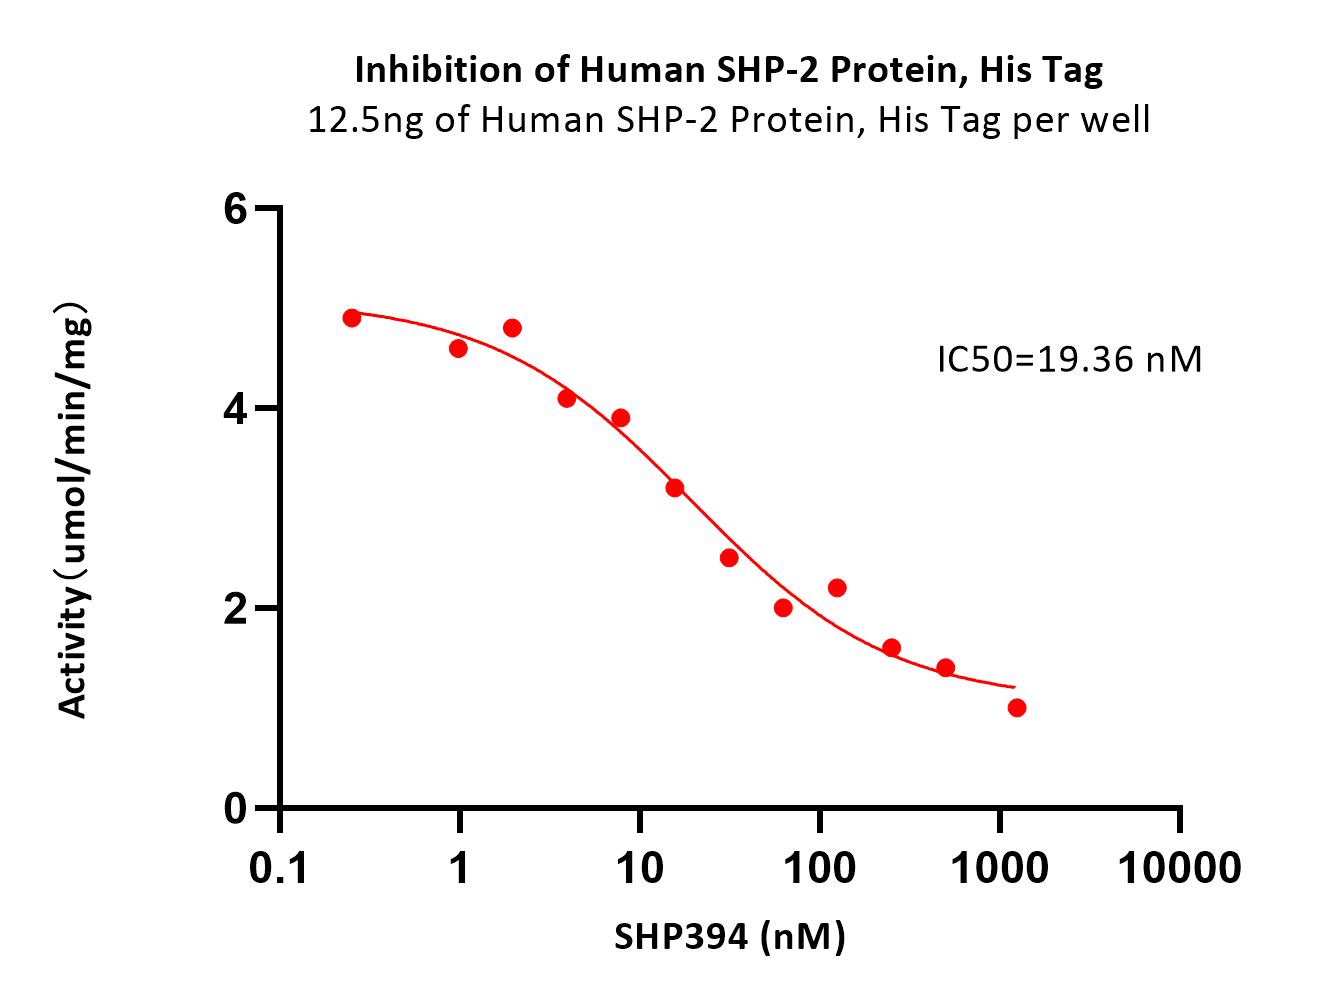 SHP-2 ENZYME